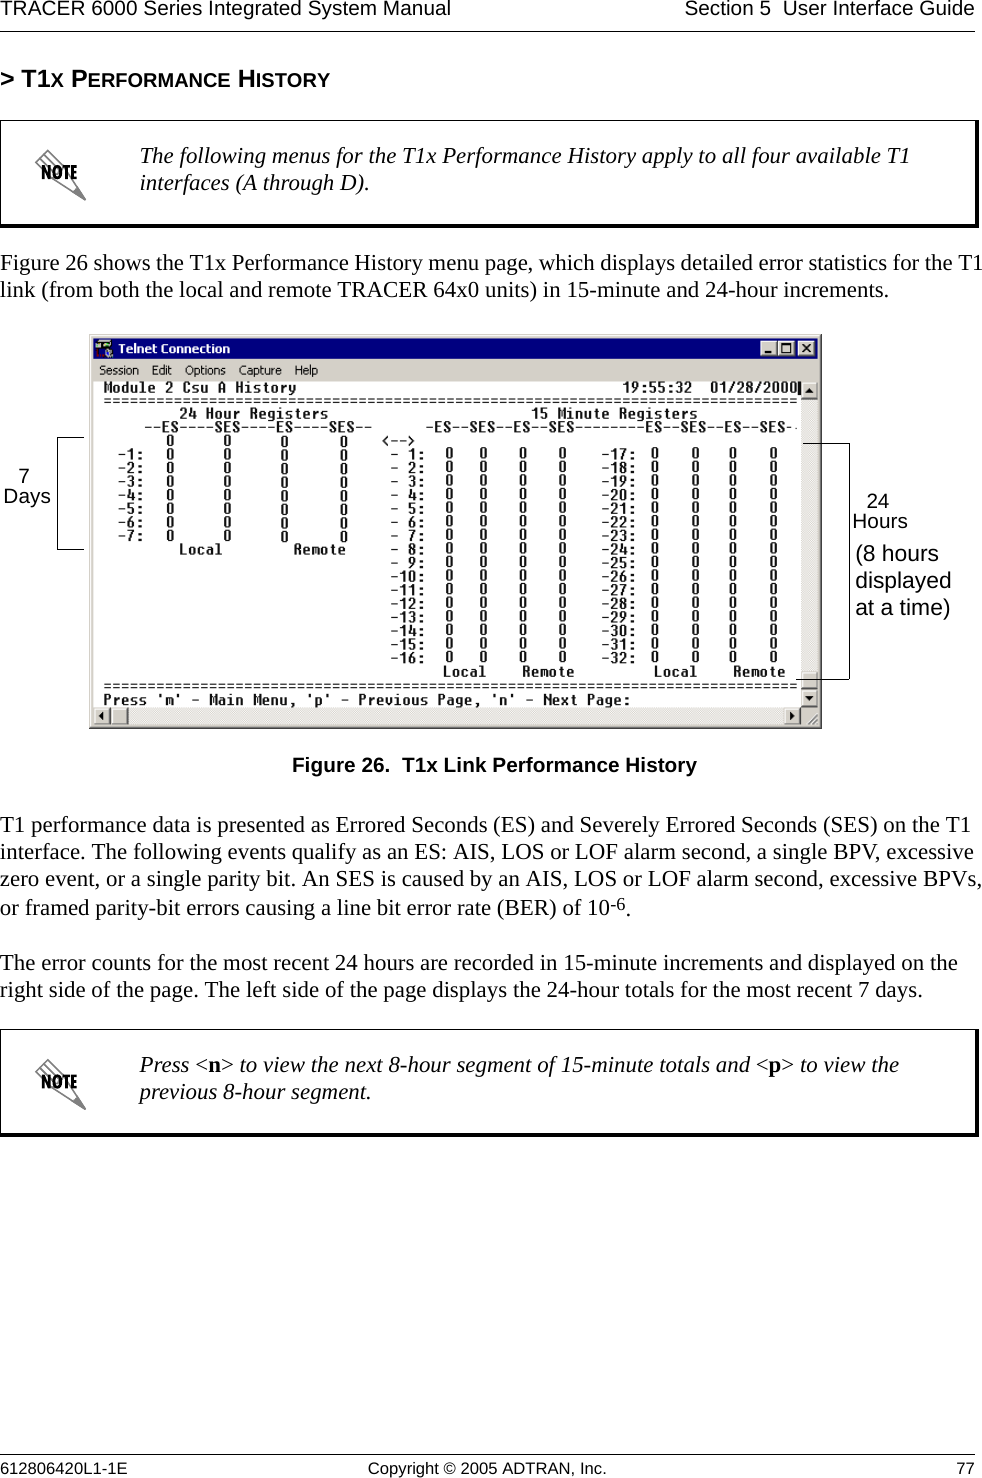 TRACER 6000 Series Integrated System Manual Section 5  User Interface Guide612806420L1-1E Copyright © 2005 ADTRAN, Inc. 77&gt; T1X PERFORMANCE HISTORYFigure 26 shows the T1x Performance History menu page, which displays detailed error statistics for the T1 link (from both the local and remote TRACER 64x0 units) in 15-minute and 24-hour increments.Figure 26.  T1x Link Performance HistoryT1 performance data is presented as Errored Seconds (ES) and Severely Errored Seconds (SES) on the T1 interface. The following events qualify as an ES: AIS, LOS or LOF alarm second, a single BPV, excessive zero event, or a single parity bit. An SES is caused by an AIS, LOS or LOF alarm second, excessive BPVs, or framed parity-bit errors causing a line bit error rate (BER) of 10-6.The error counts for the most recent 24 hours are recorded in 15-minute increments and displayed on the right side of the page. The left side of the page displays the 24-hour totals for the most recent 7 days.The following menus for the T1x Performance History apply to all four available T1 interfaces (A through D).Press &lt;n&gt; to view the next 8-hour segment of 15-minute totals and &lt;p&gt; to view the previous 8-hour segment.24 Hours7 Days(8 hours displayed at a time)